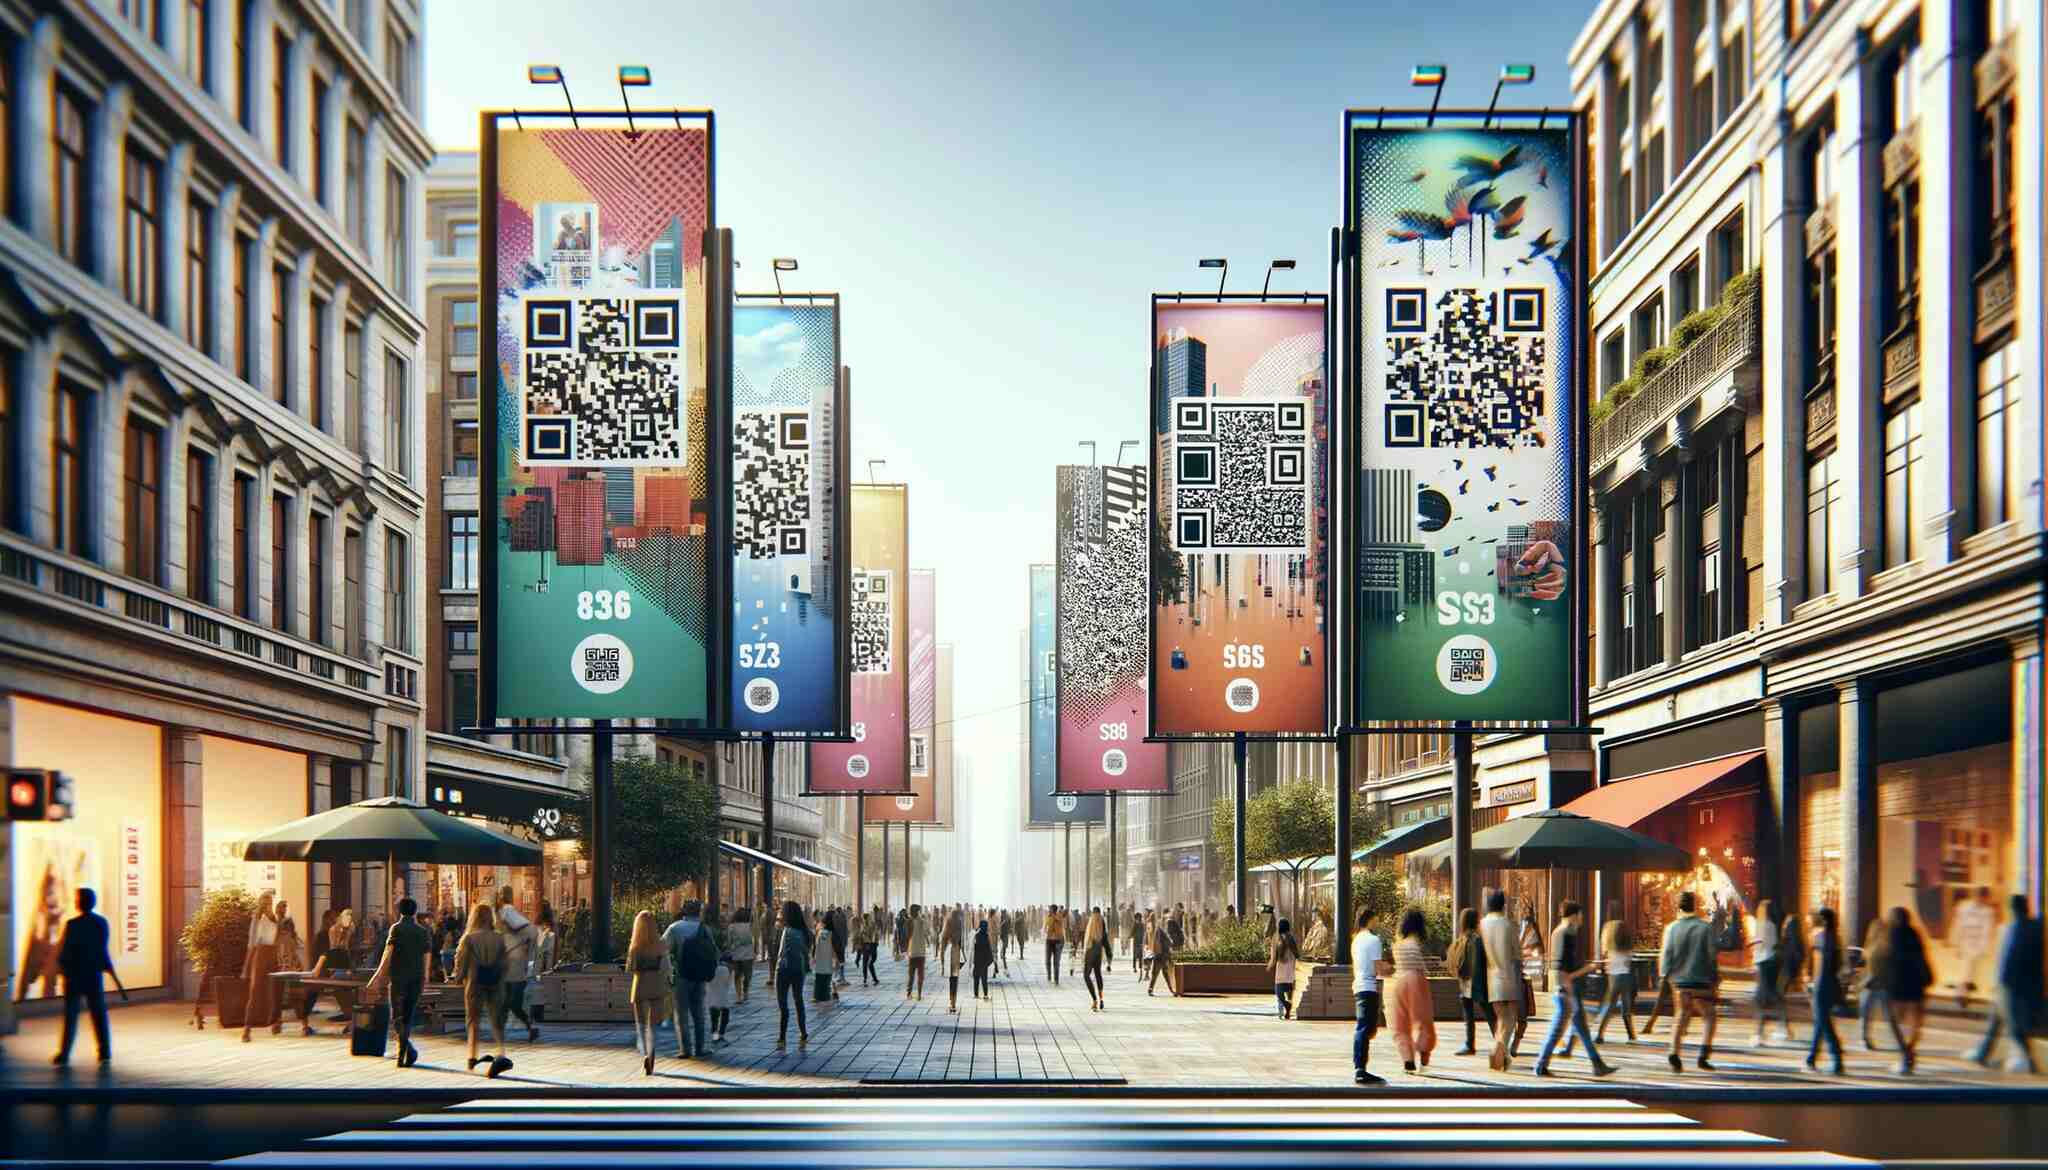 a busy street scene with multiple banners displaying QR codes